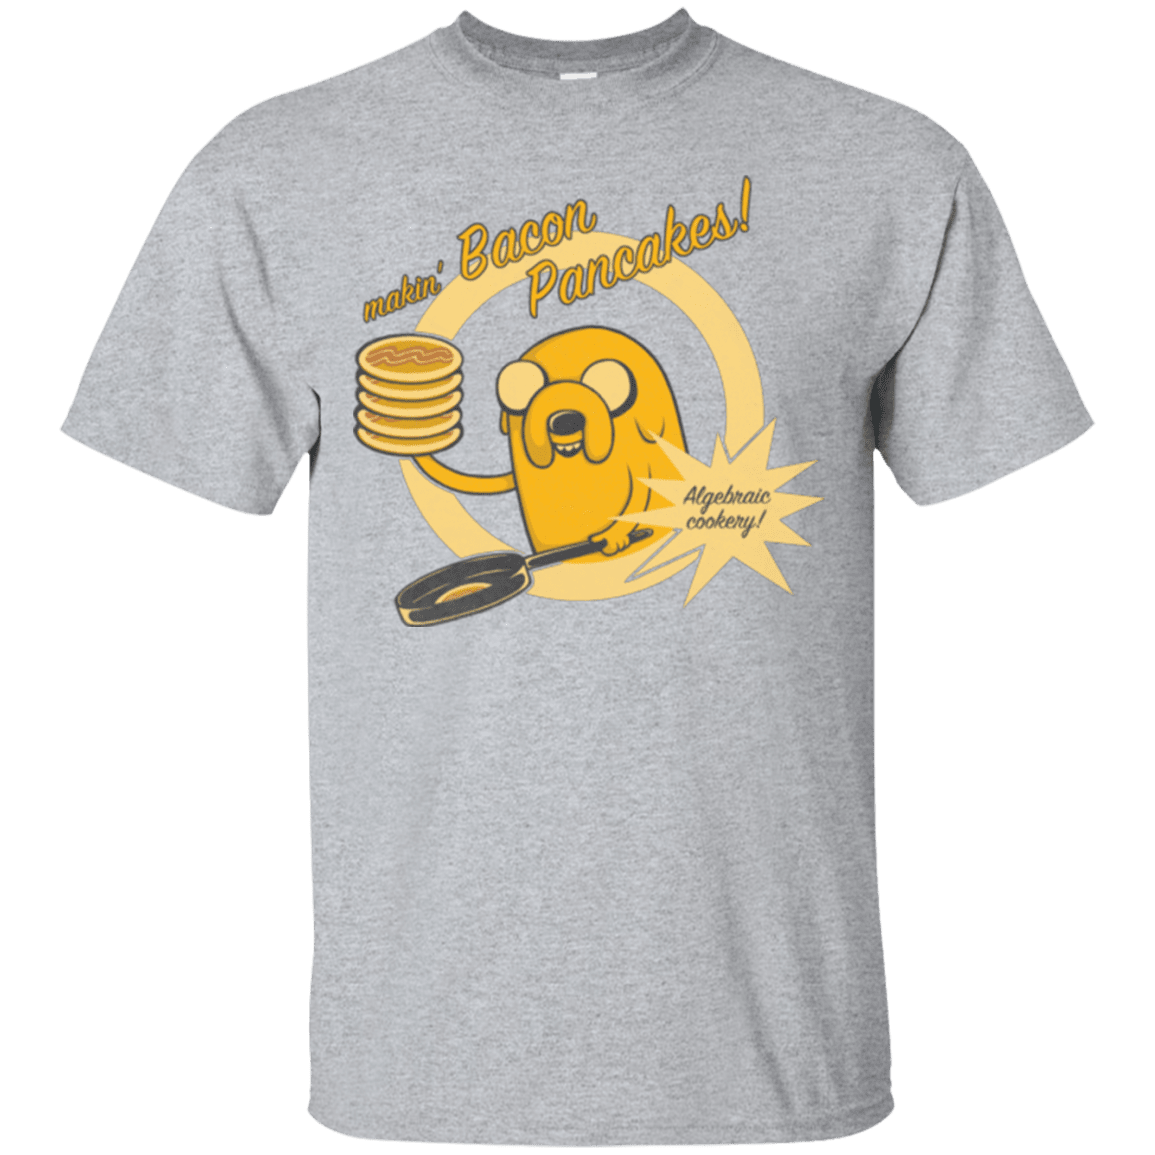 T-Shirts Sport Grey / Small Cooking Time T-Shirt